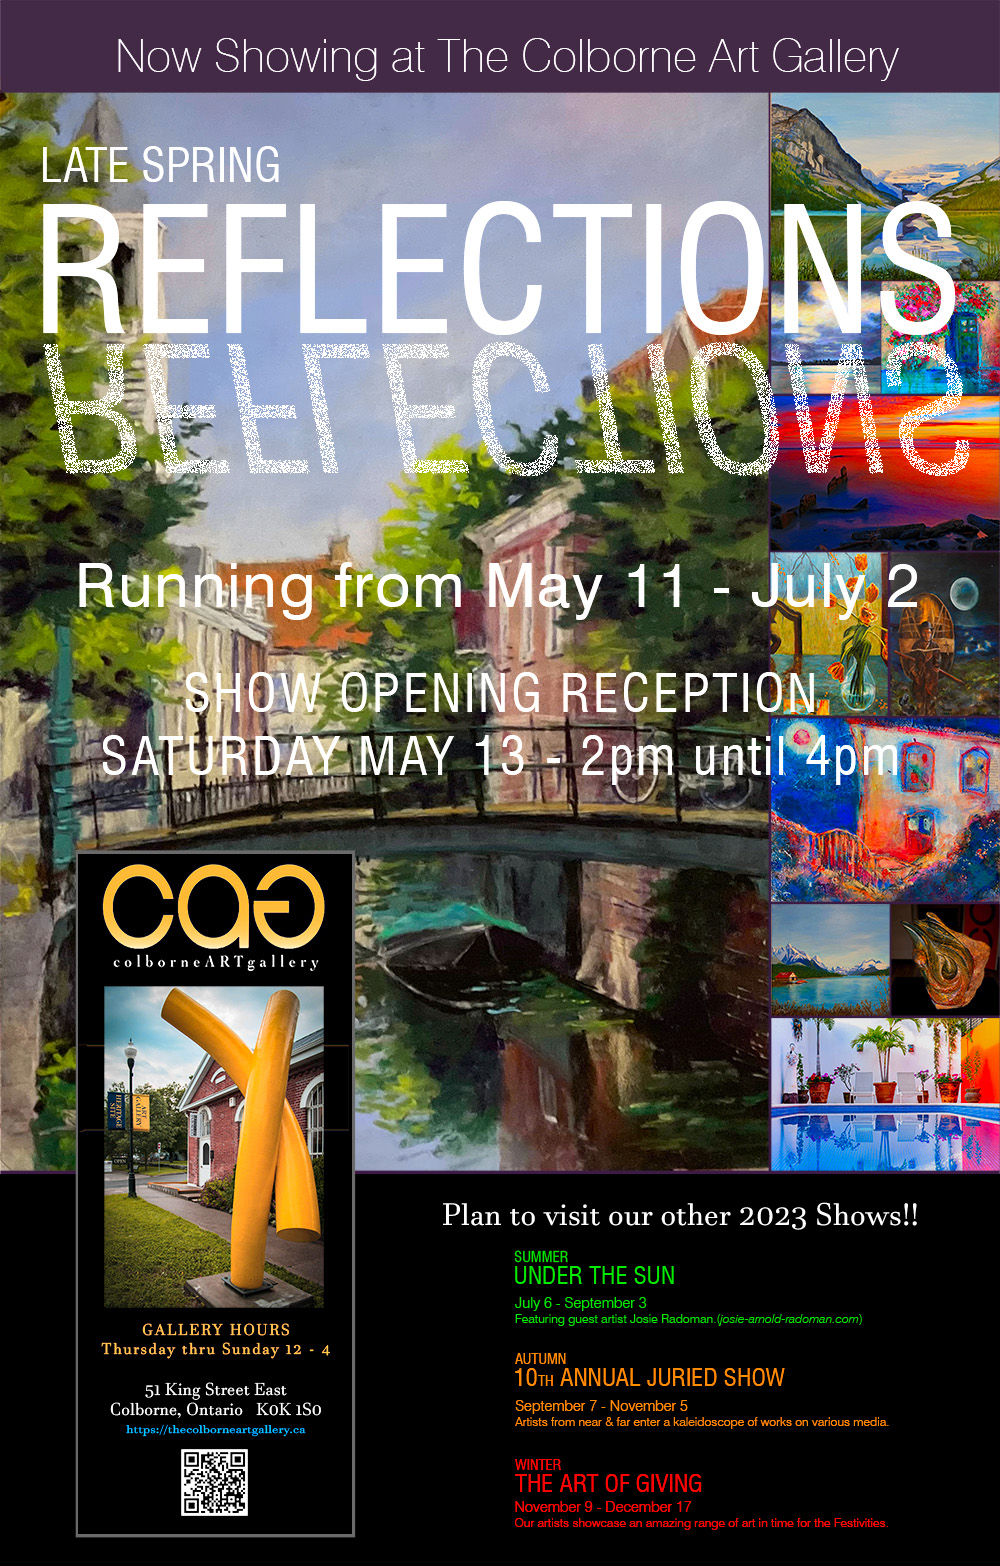 The Colborne Art Gallery Show Reflections